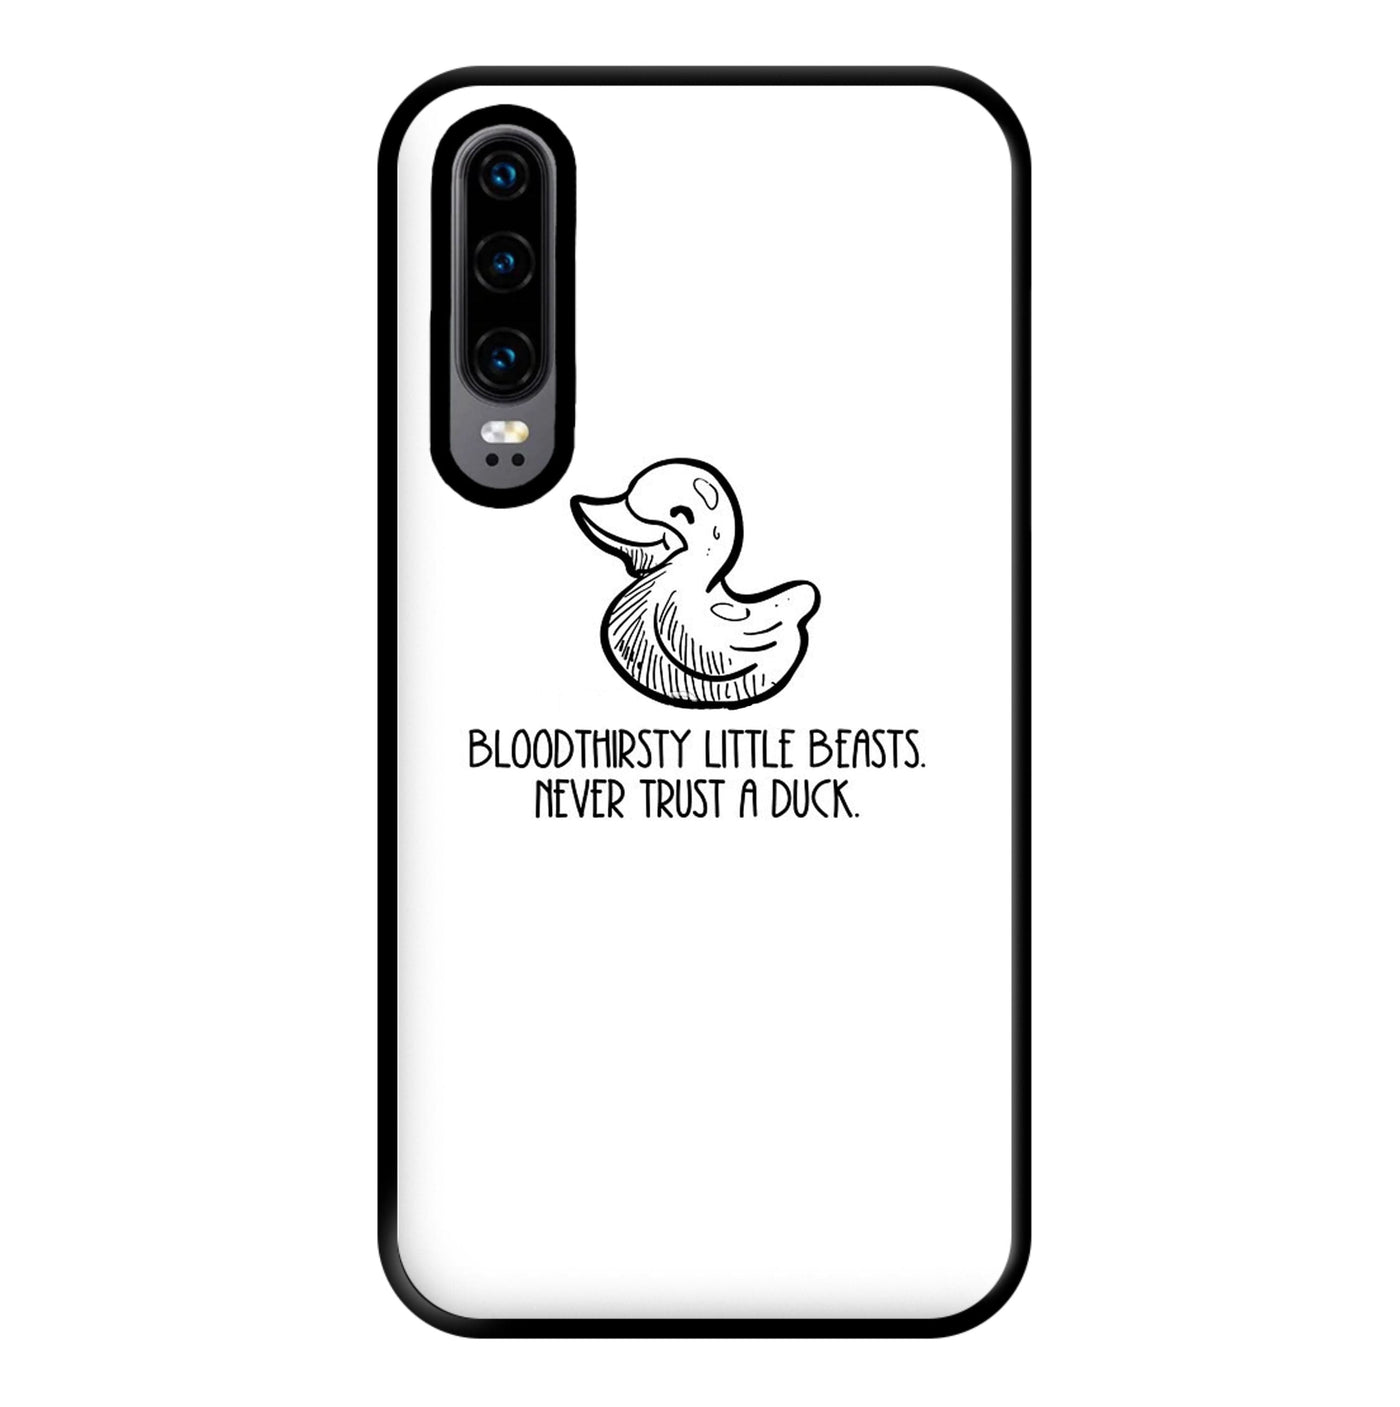 Bloodythirsty Little Beasts Never Trust A Duck - Shadowhunters Phone Case